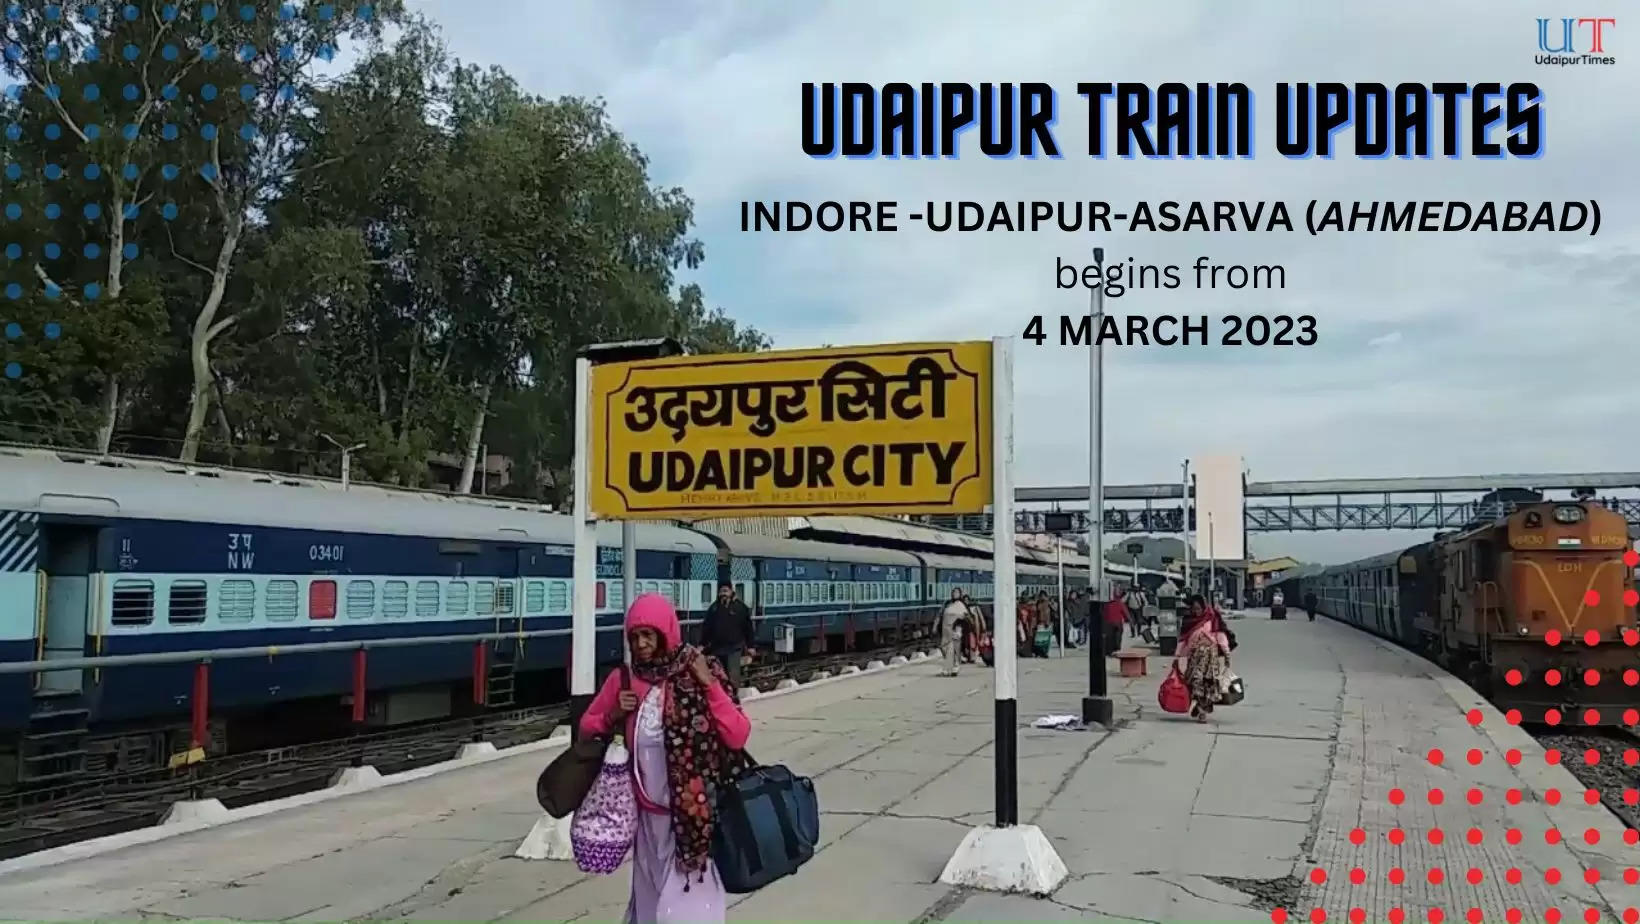 Indore – Udaipur Express extended till Asarva (Ahmedabad) from 4 March 2023